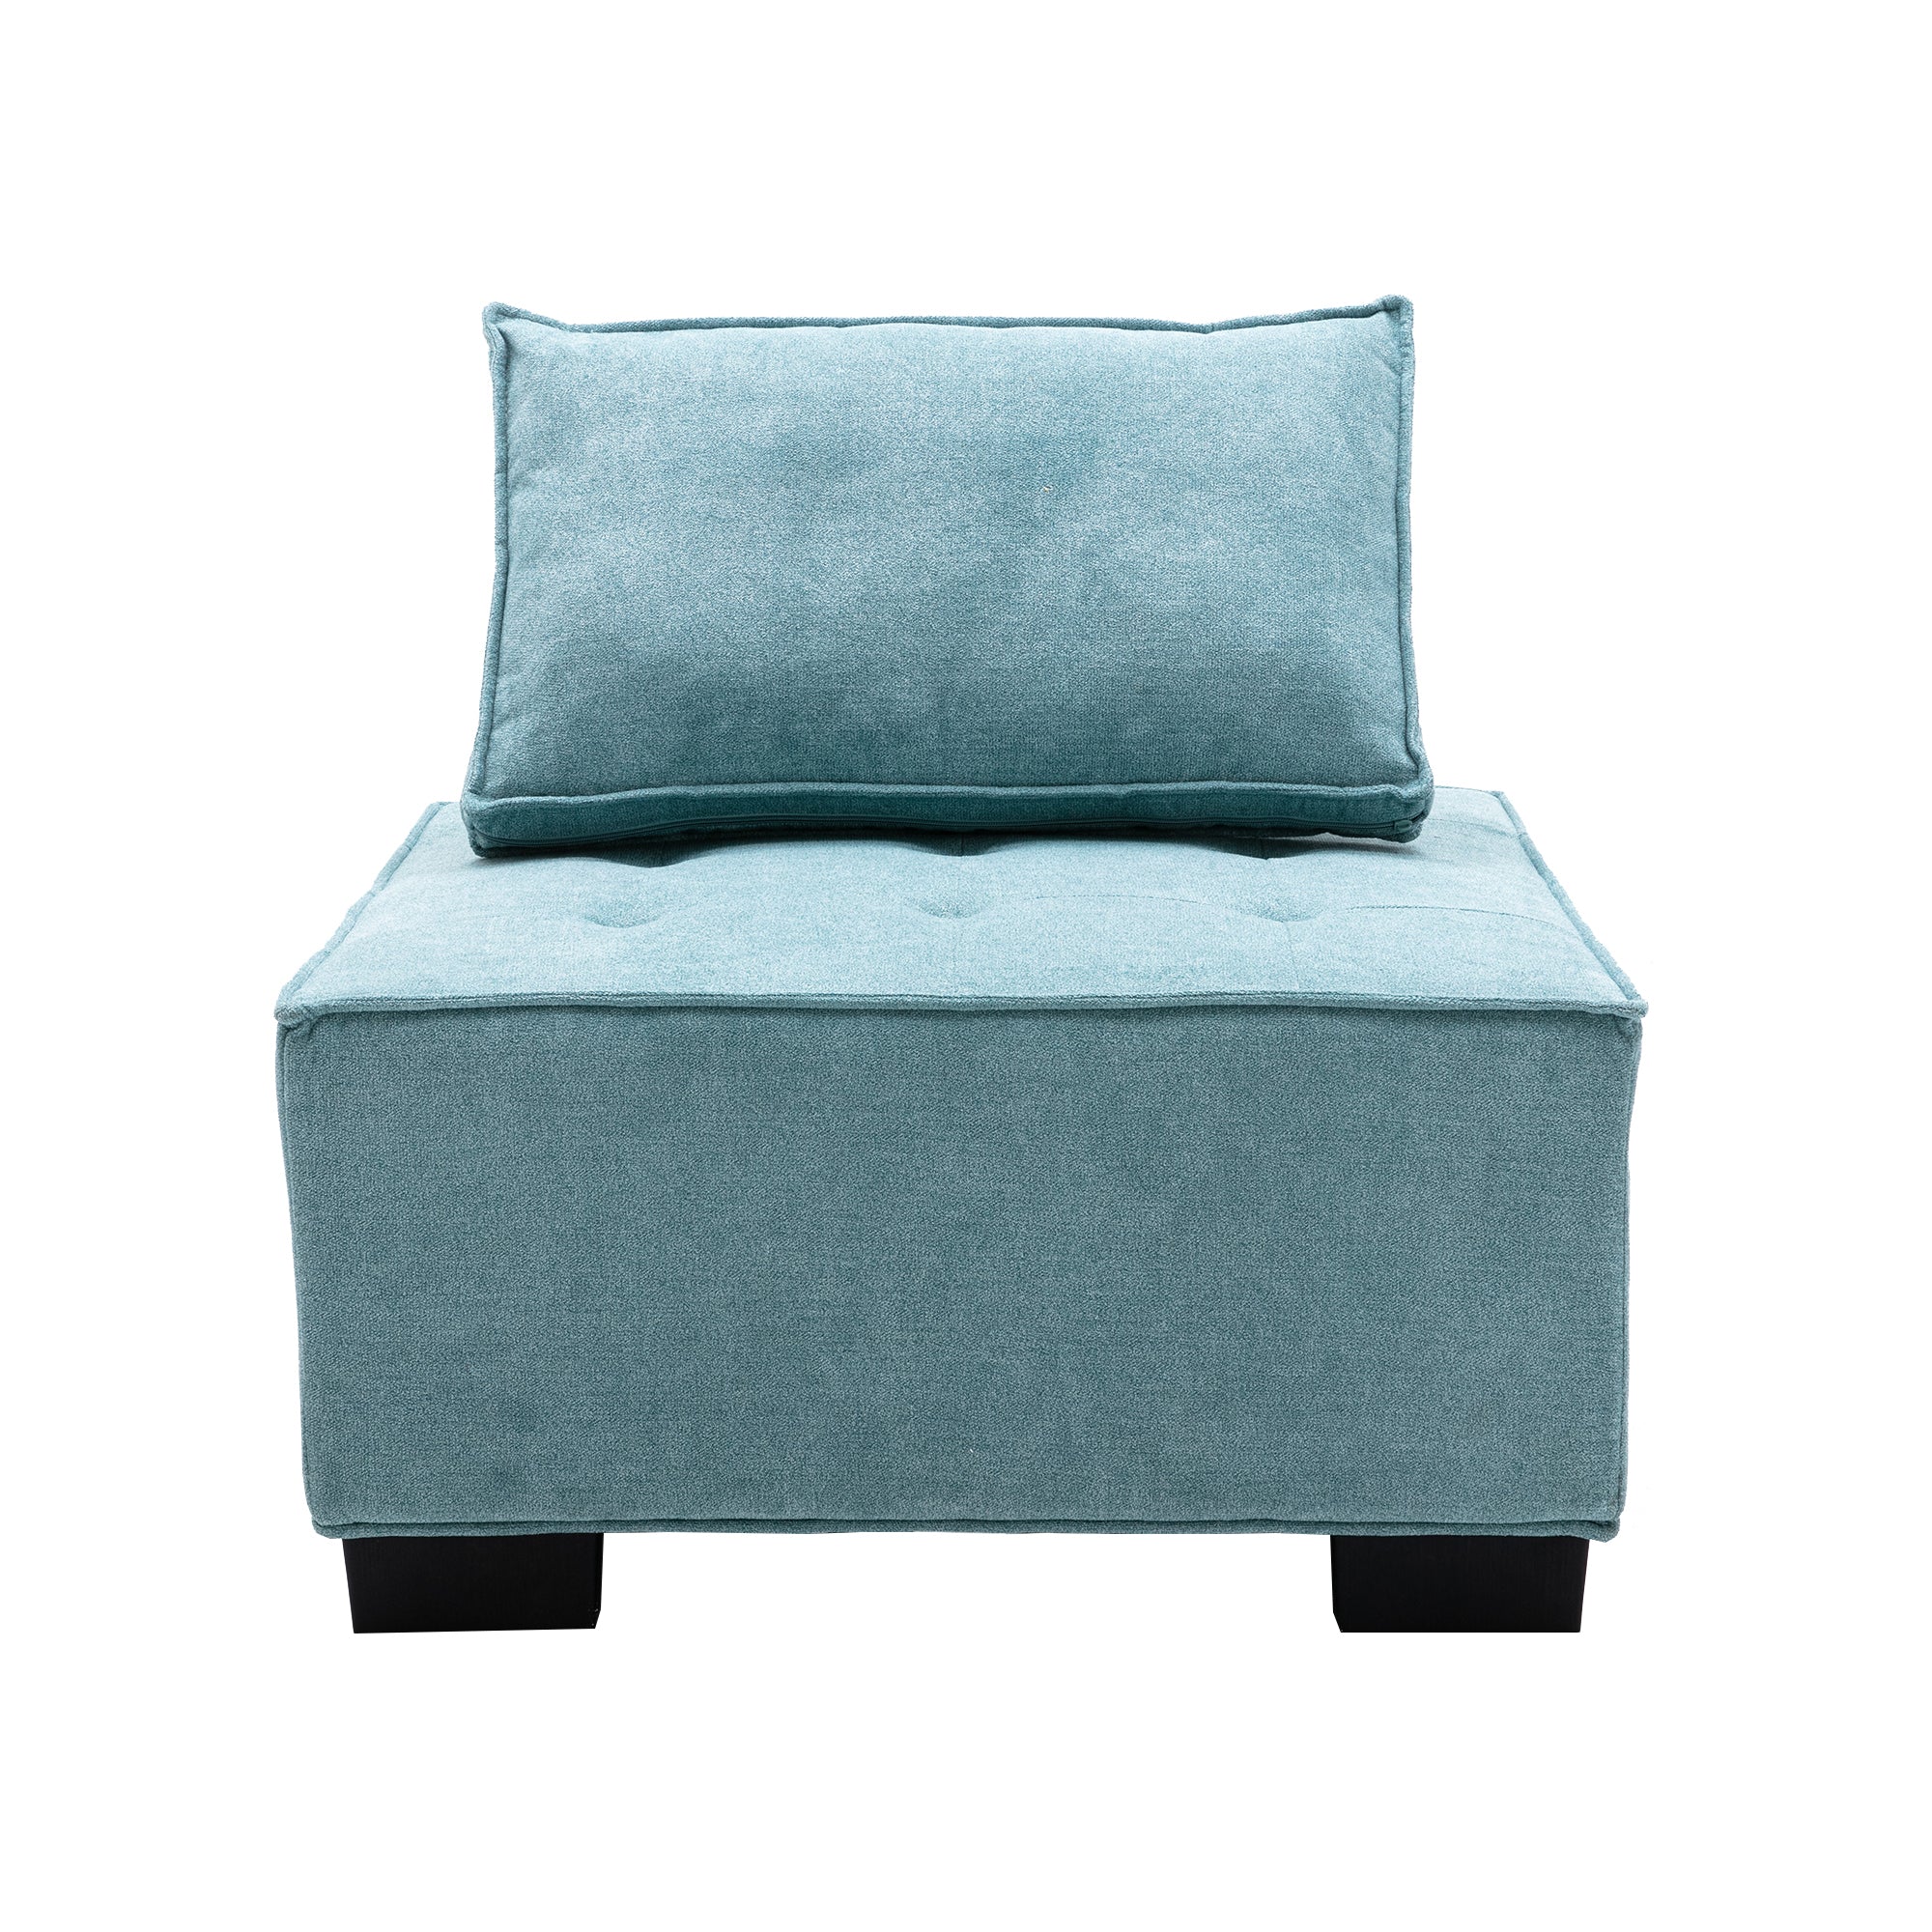 COOMORE LIVING ROOM OTTOMAN LAZY CHAIR mint green-polyester